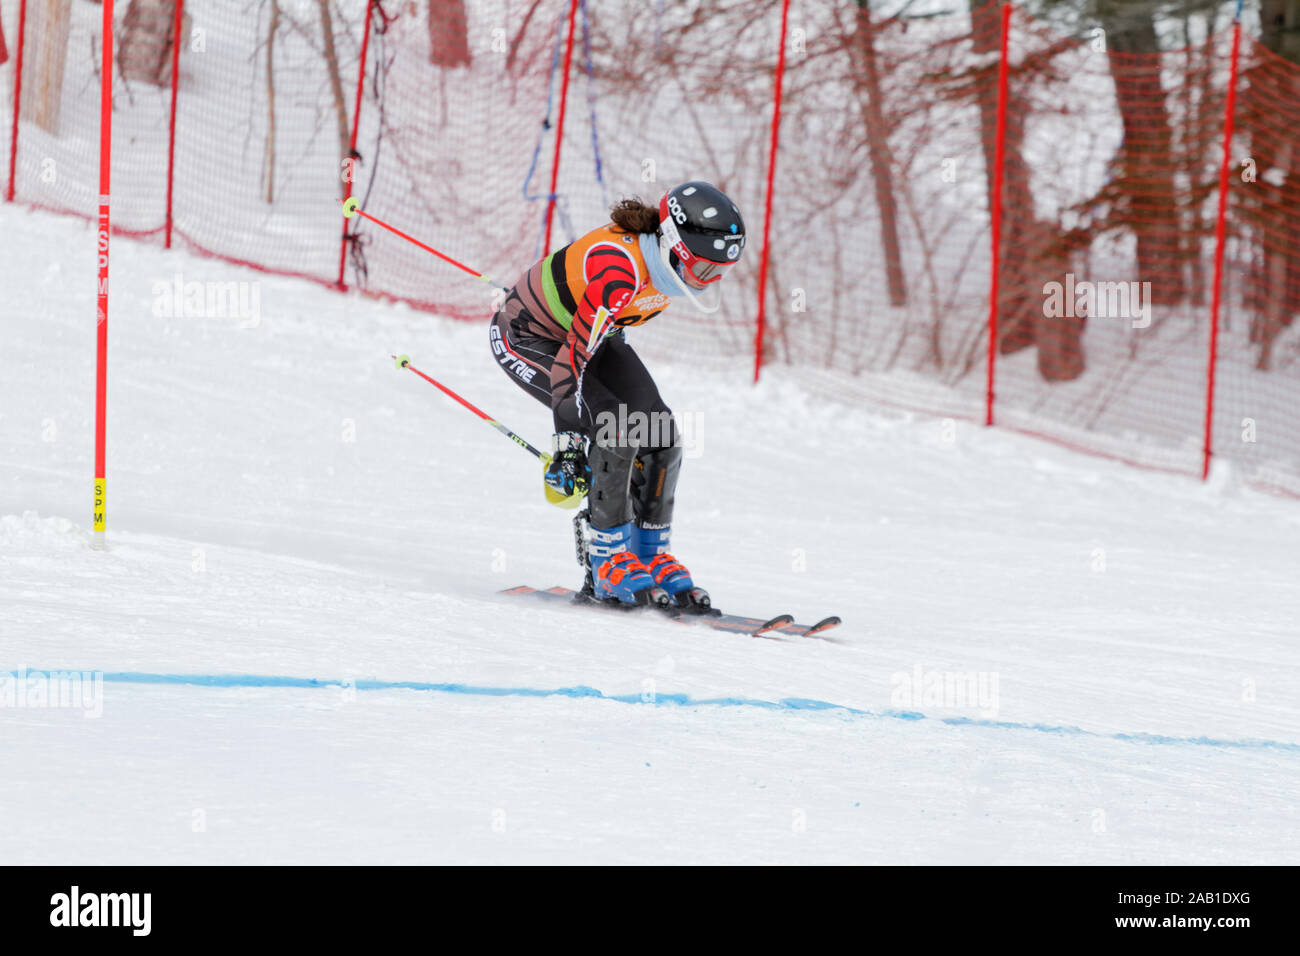 Quebec,Canada. A skier competes in the Super Serie Sports Experts Ladies slalom race held at Val Saint-Come Stock Photo